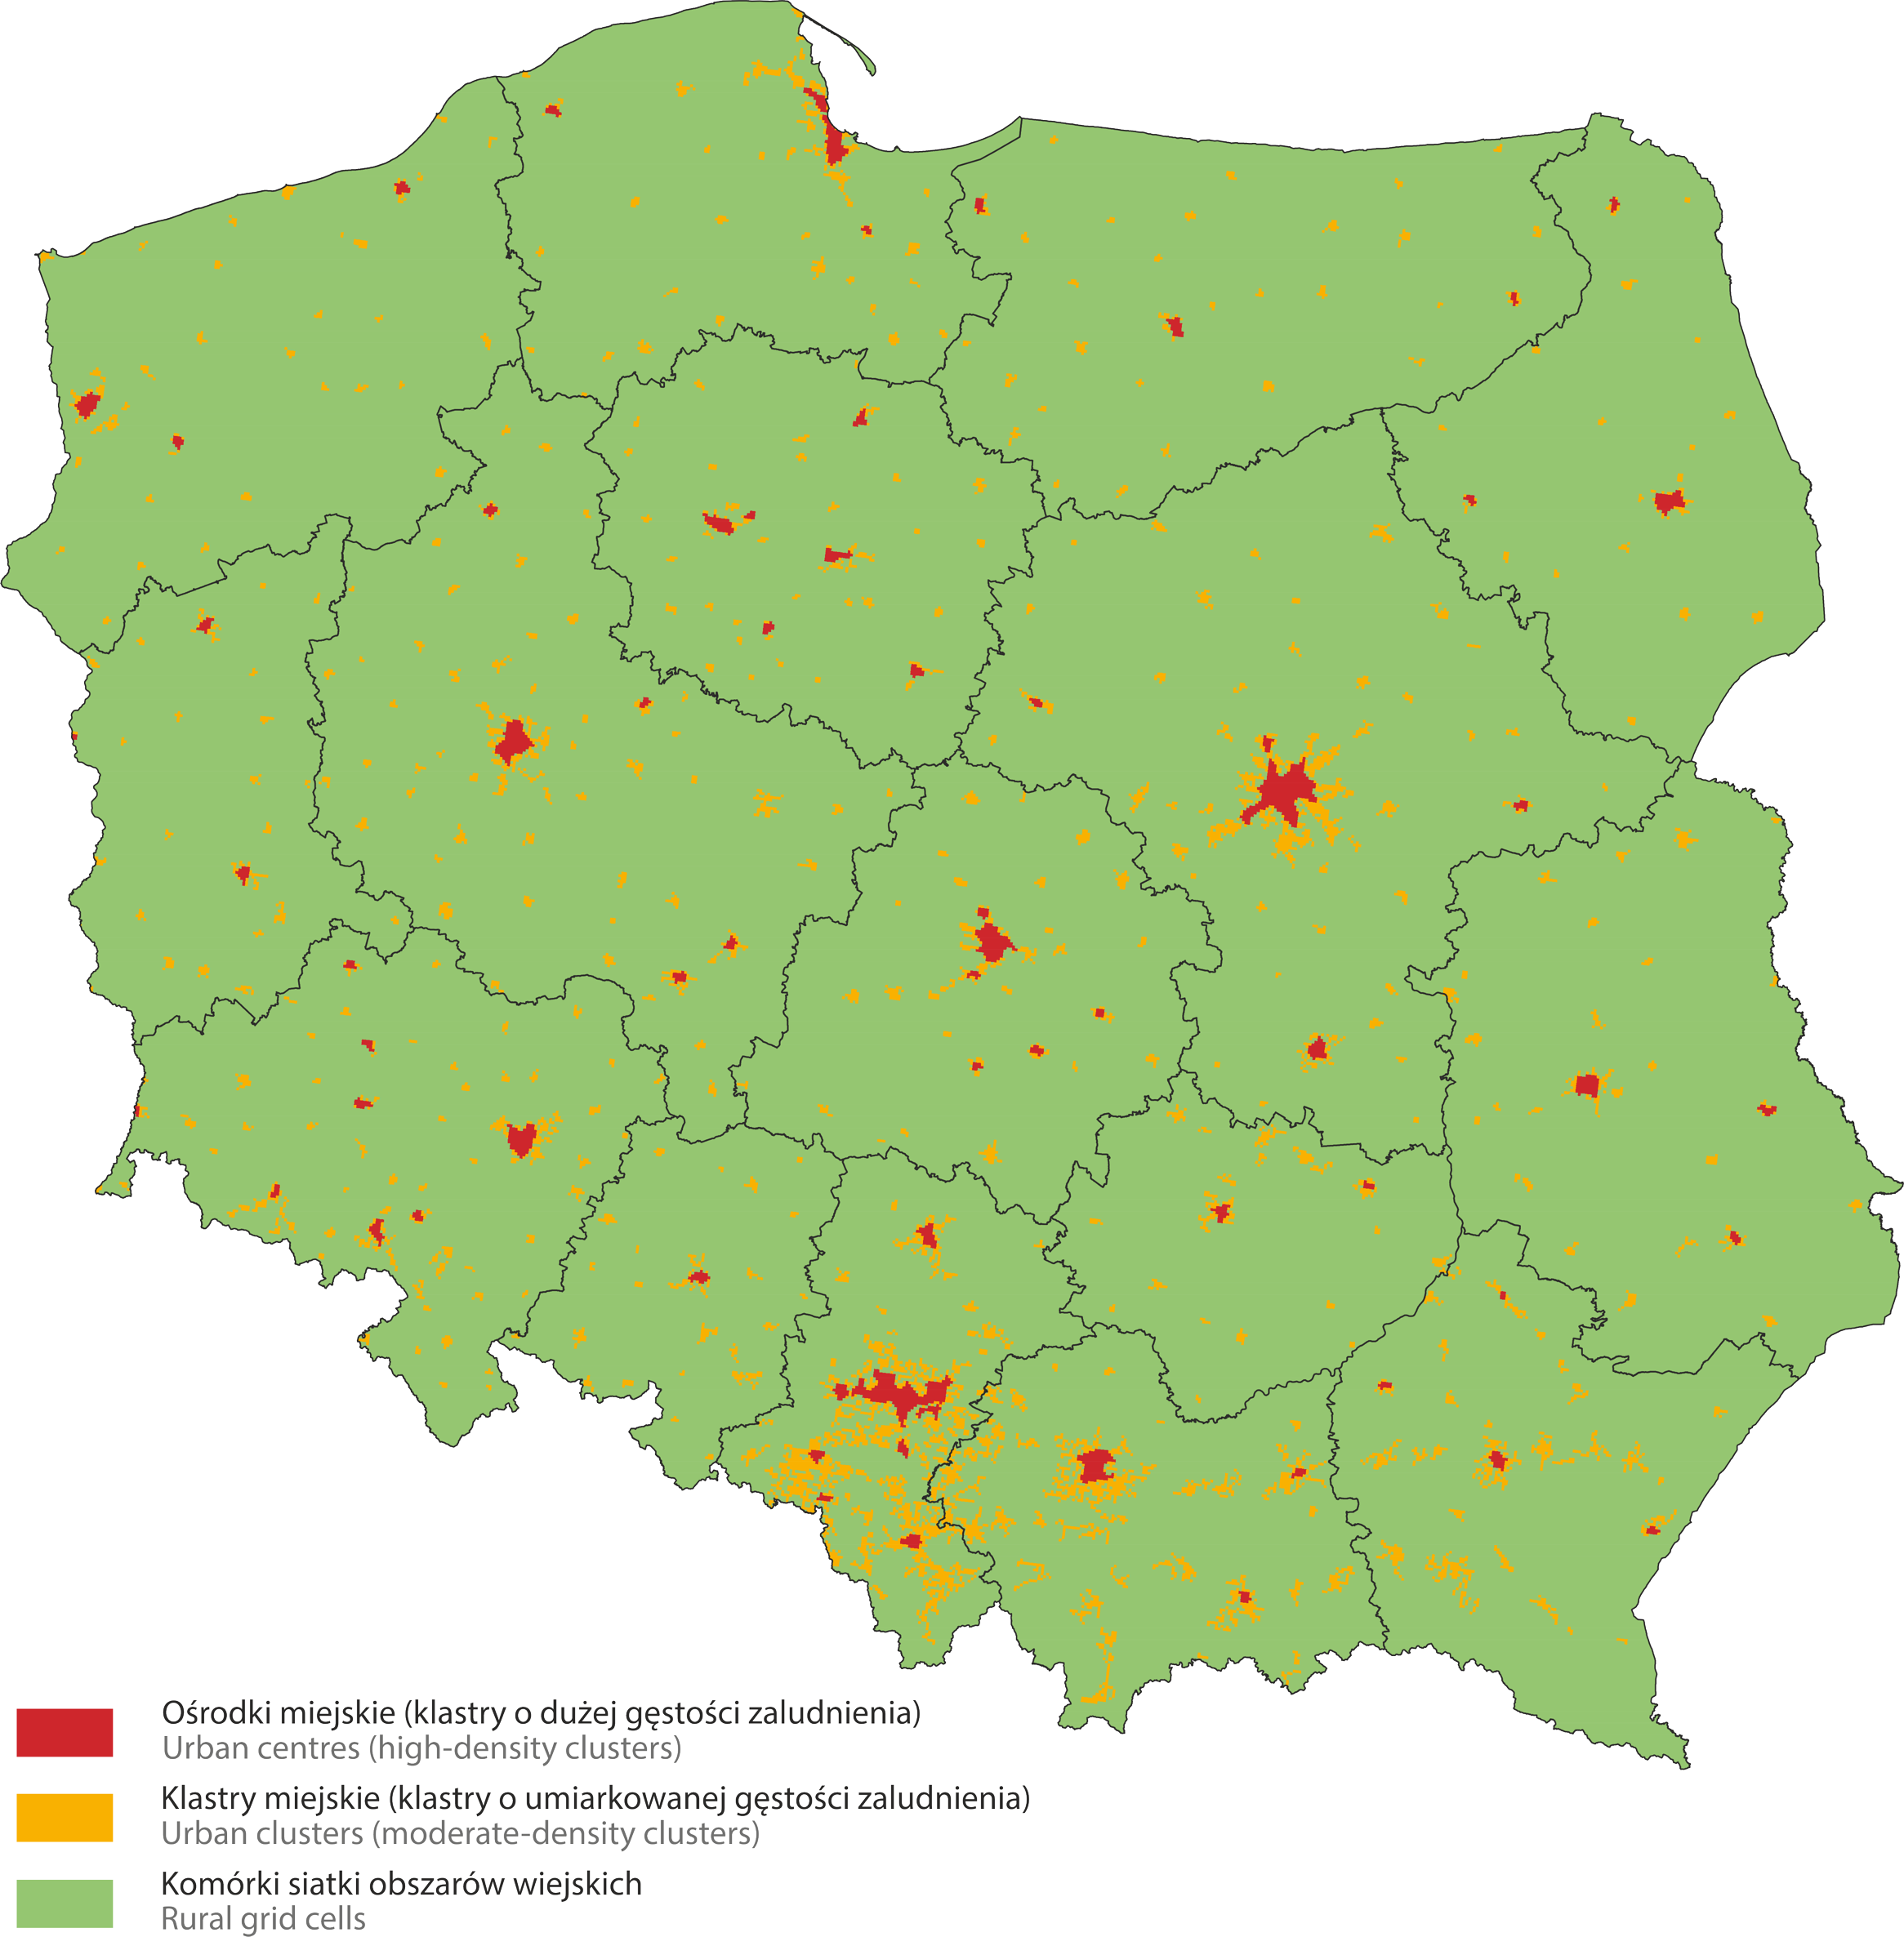 Cluster types in Poland based on the one-kilometer grid (Eurostat data based on 2011 population in a 1 km2 grid)